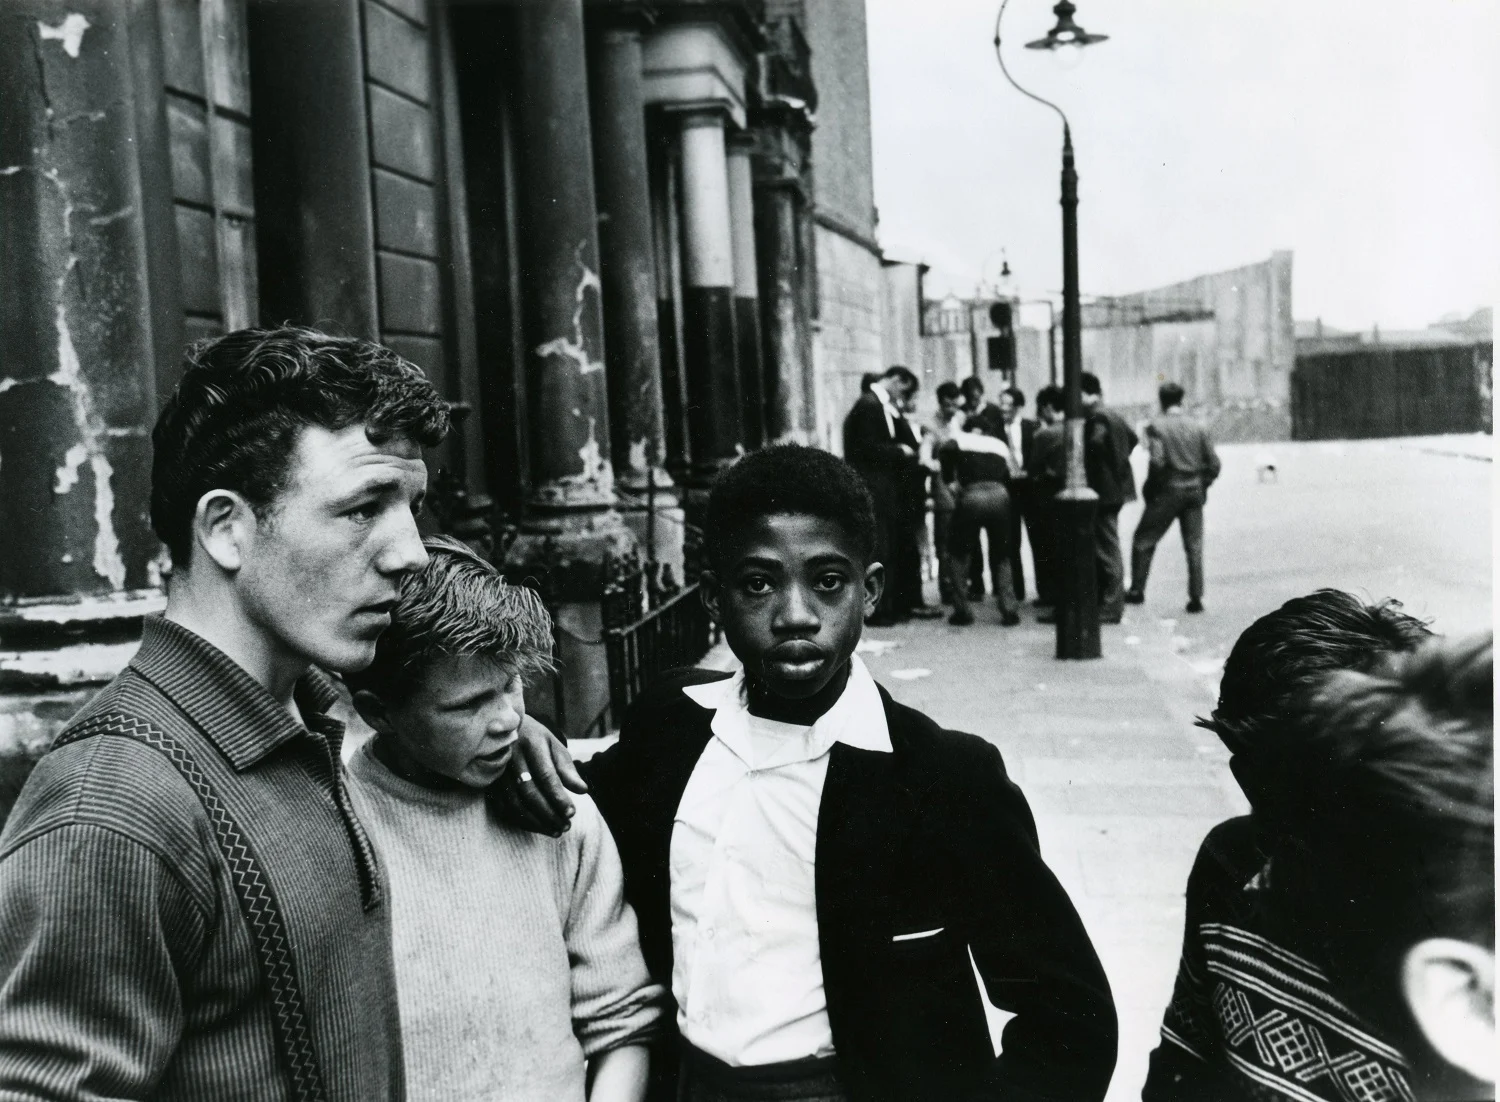 Black and white photograph of a group of Black and white young men and boys in the street in the 1950s.